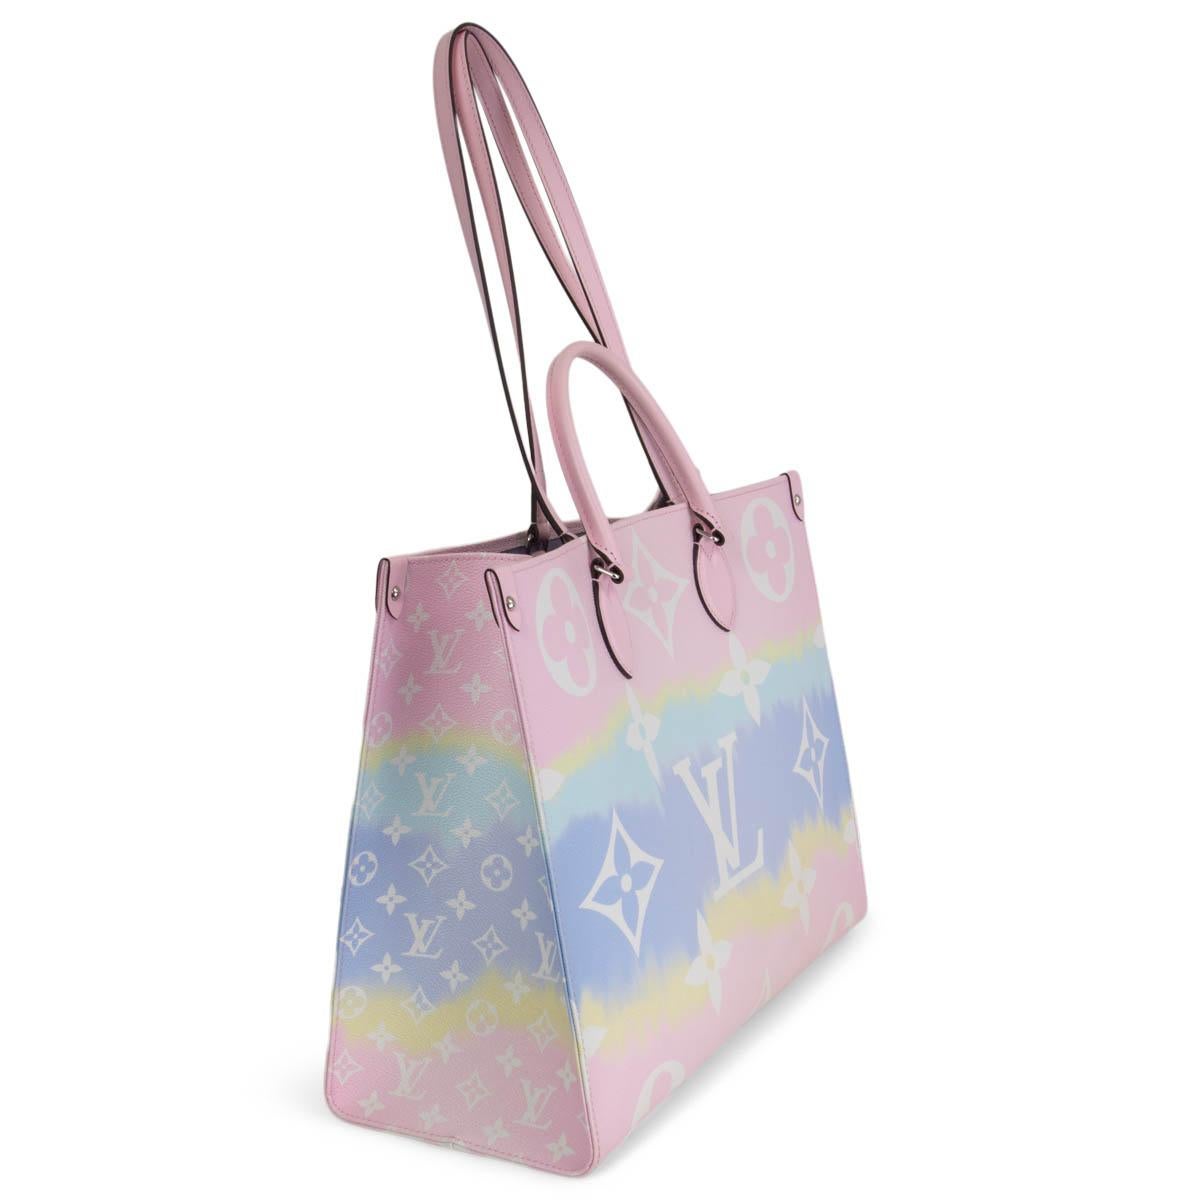 100% authentic Louis Vuitton OnTheGo GM Escale Tote Monogram Giant pastel pink, lilac, blue, yellow and white  coated canvas. Lined in lilac canvas with one zipper pocket and two patch pockets. Brand new. 

Measurements
Height	32cm